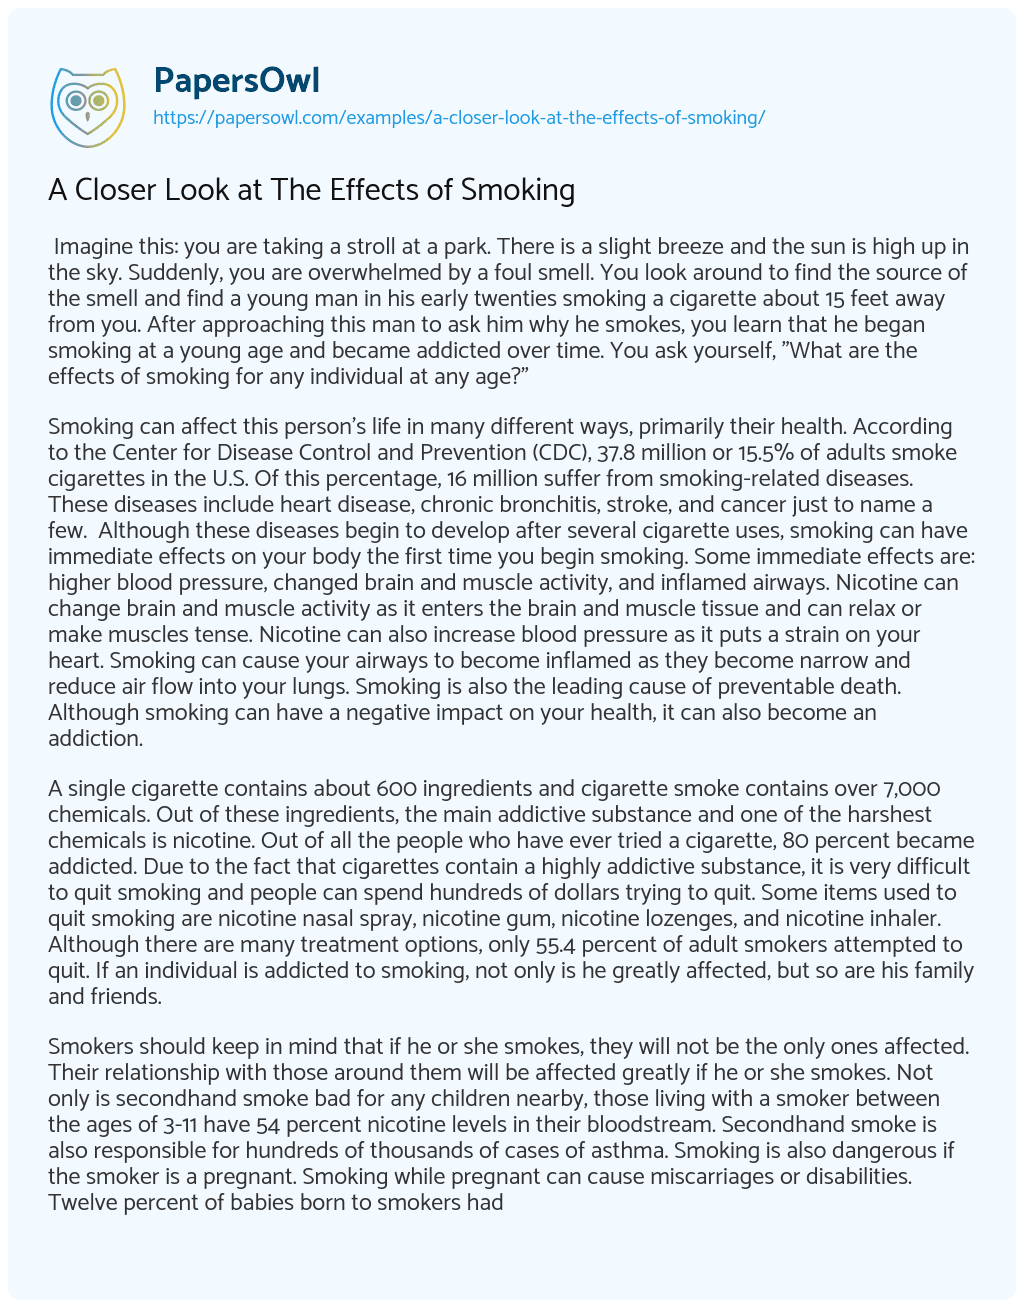 Essay on A Closer Look at the Effects of Smoking